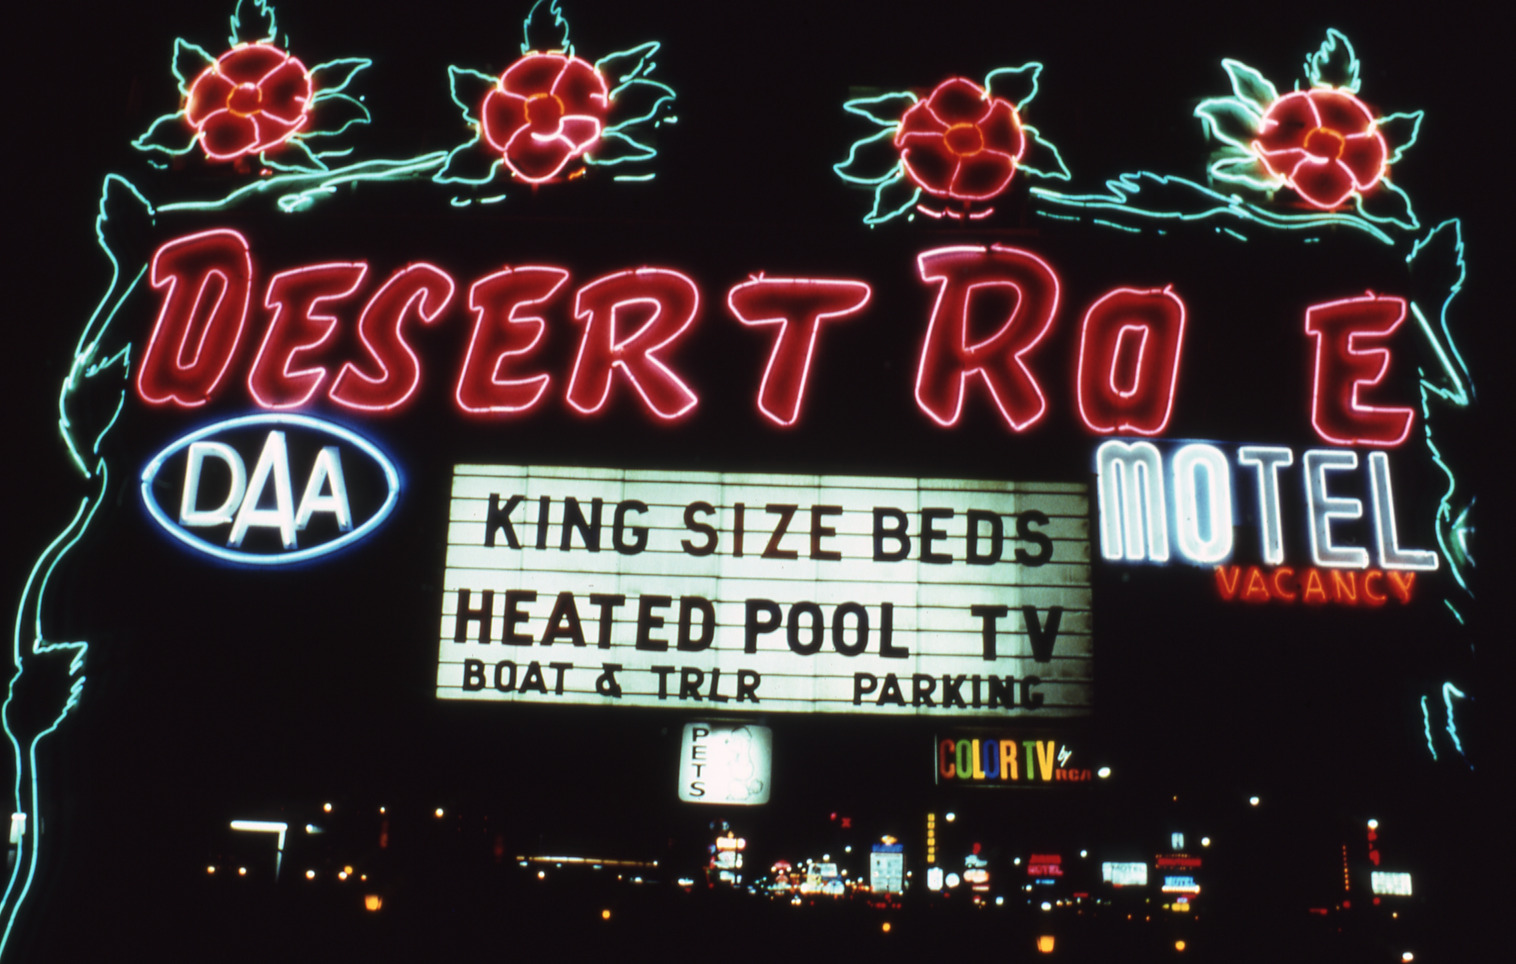 Desert Rose Motel monument and marquee signs, Las Vegas, Nevada: photographic print